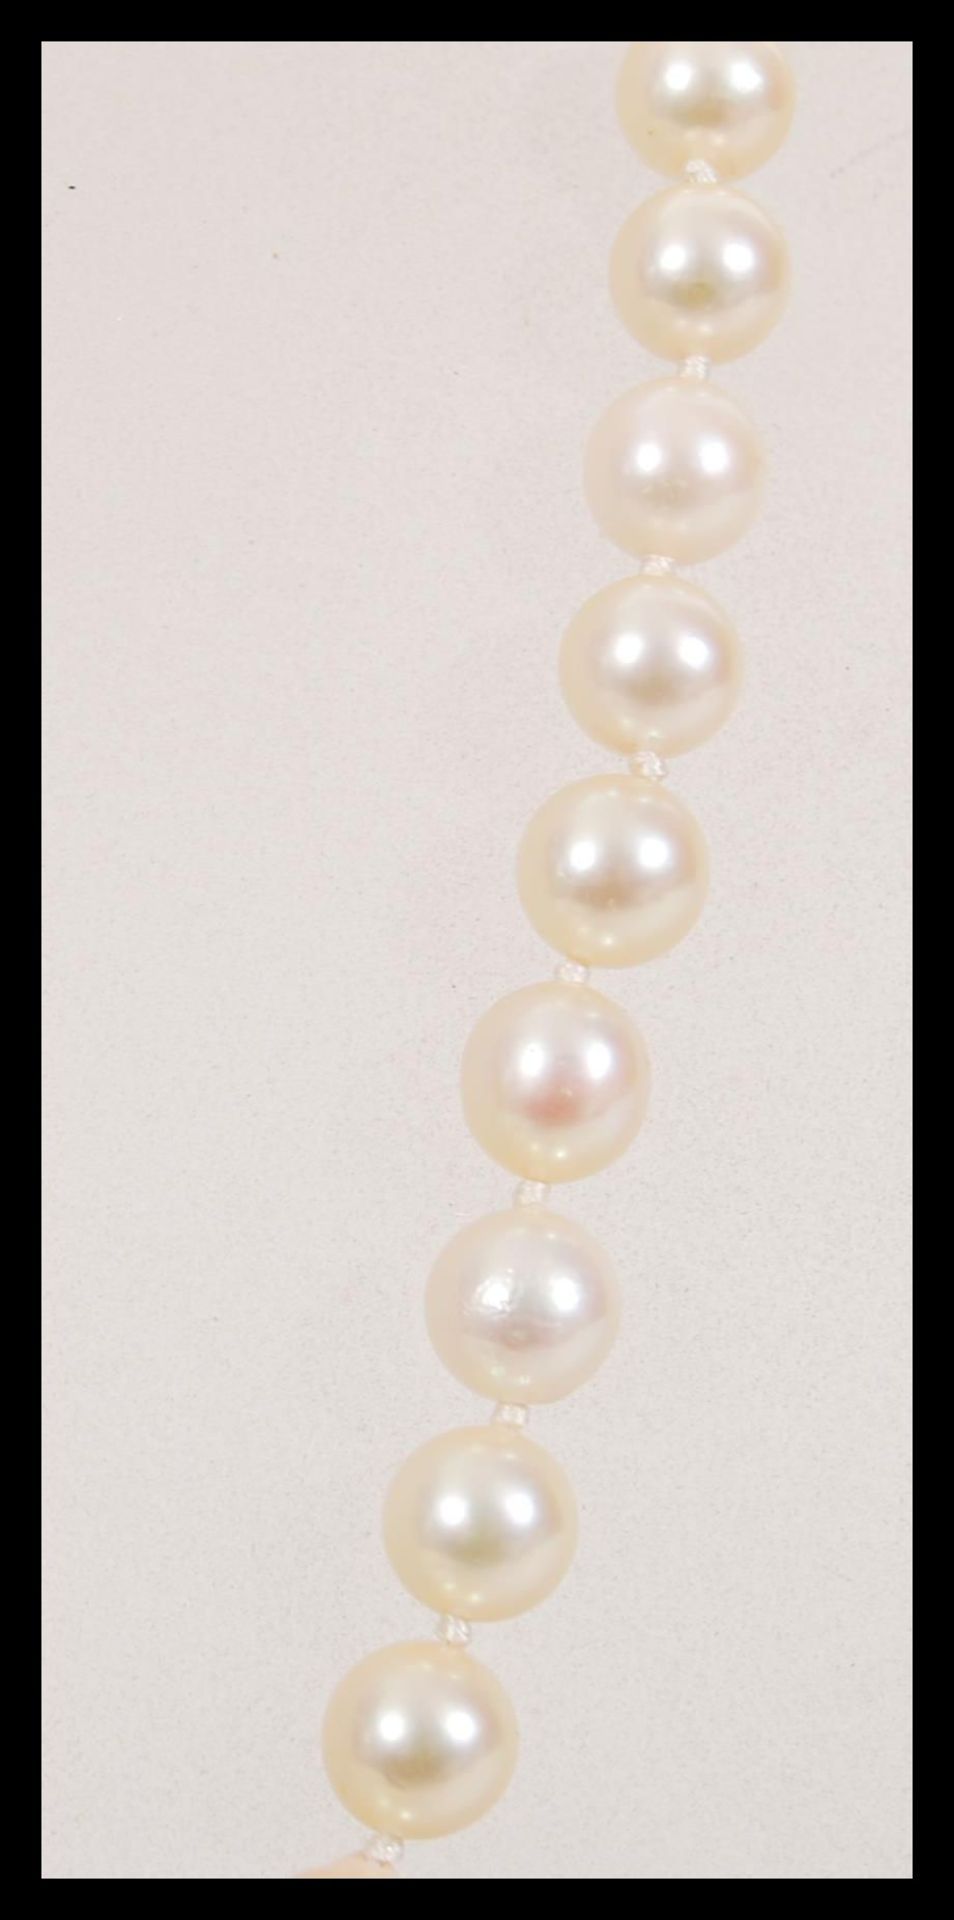 A 20th Century vintage string of cultured pearls approx 60 pearls on a knotted string, having a - Image 3 of 5